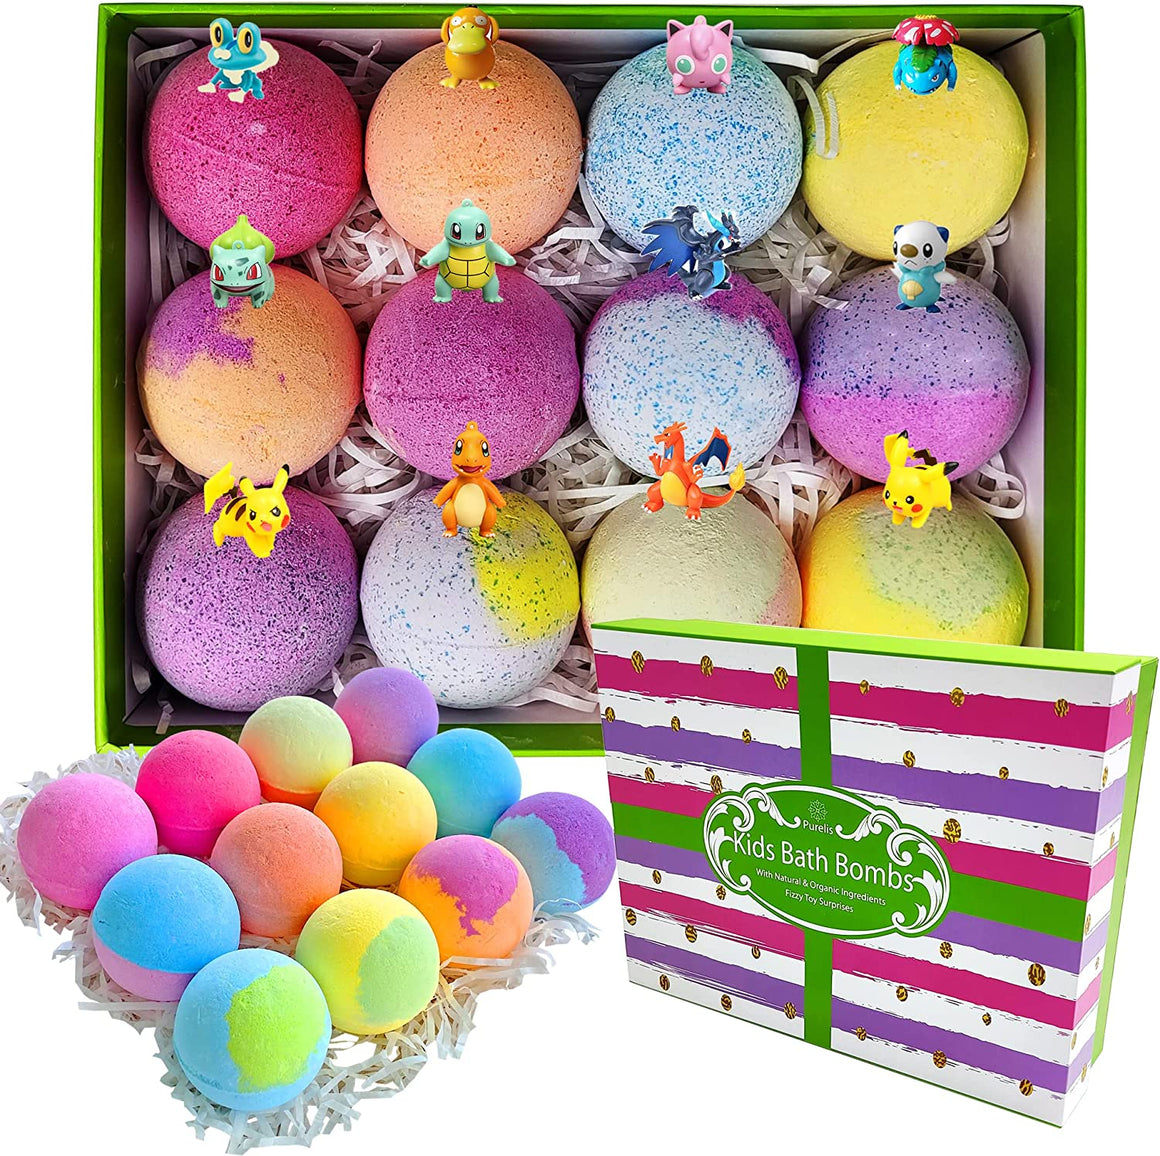 Natural Bath Bombs for Kids with Pokemon Toys Inside! Great 12 Piece Gift Set for Boys & Girls! Safe Ingredients